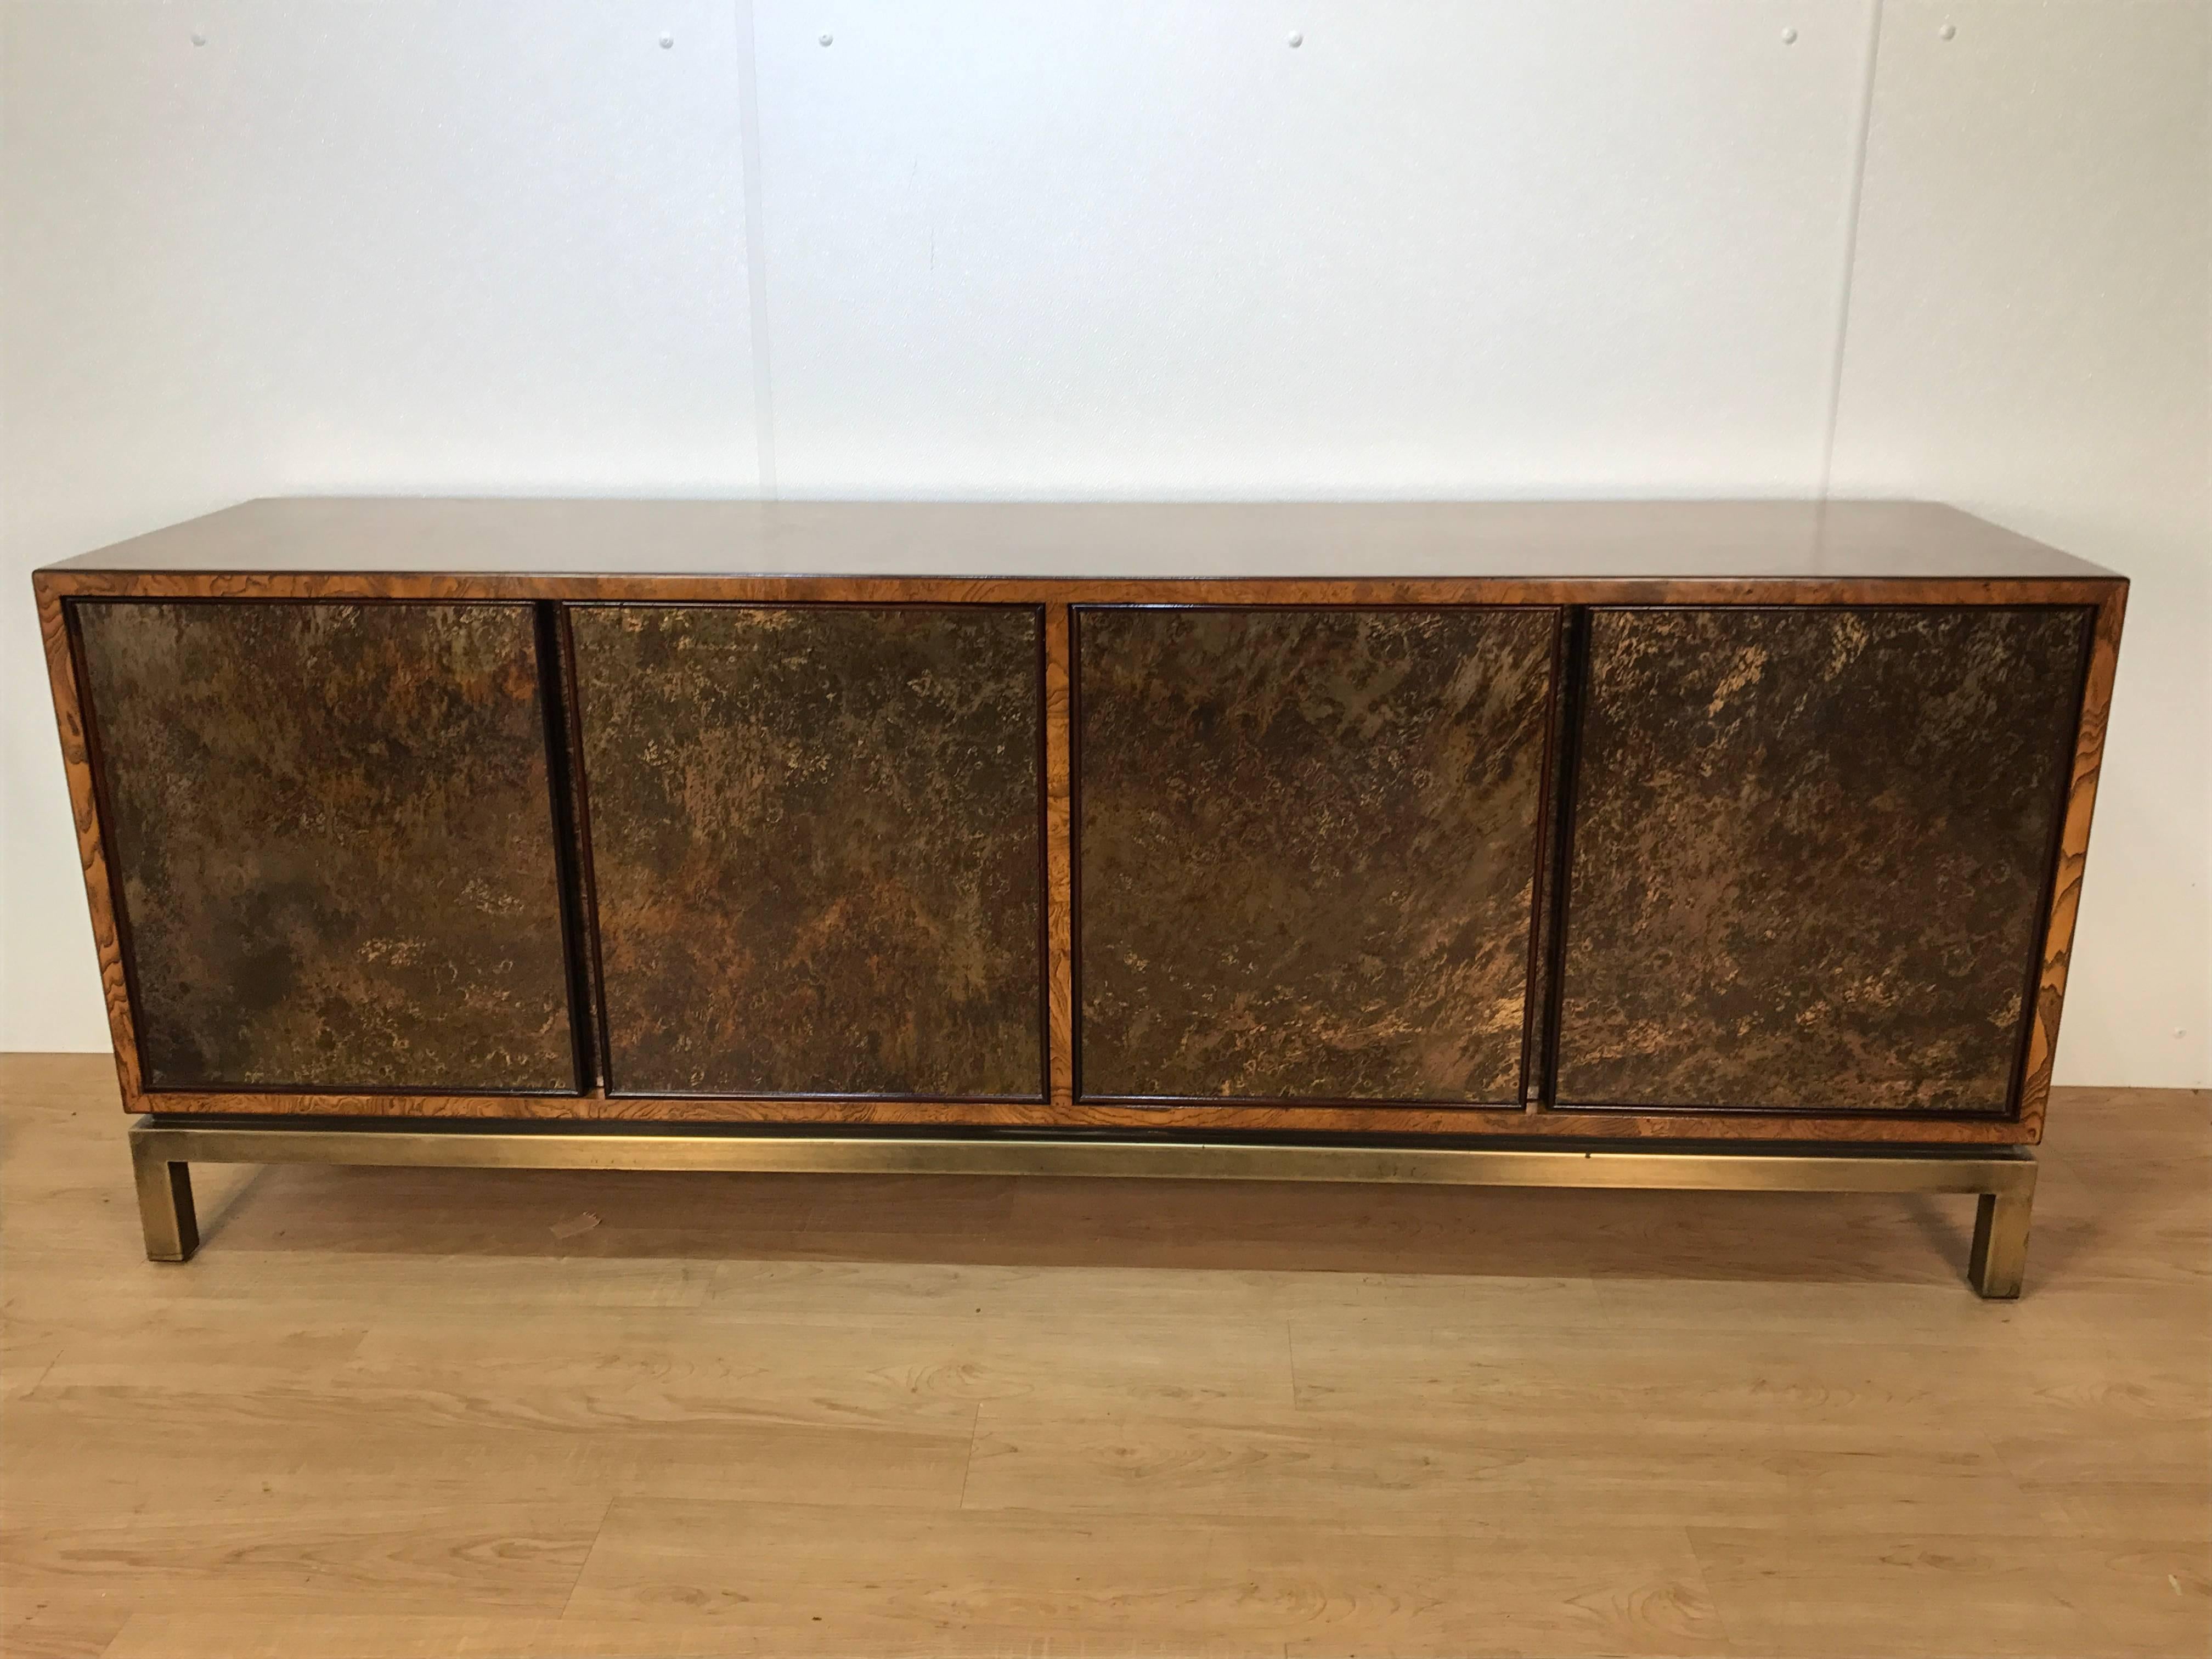 Stunning acid washed bronze sideboard by John Widdicomb, of rectangular form, the burled elm case is fitted with four concealed acid washed bronze doors raised on a patinated brass Campaign style base. Expertly finished.






